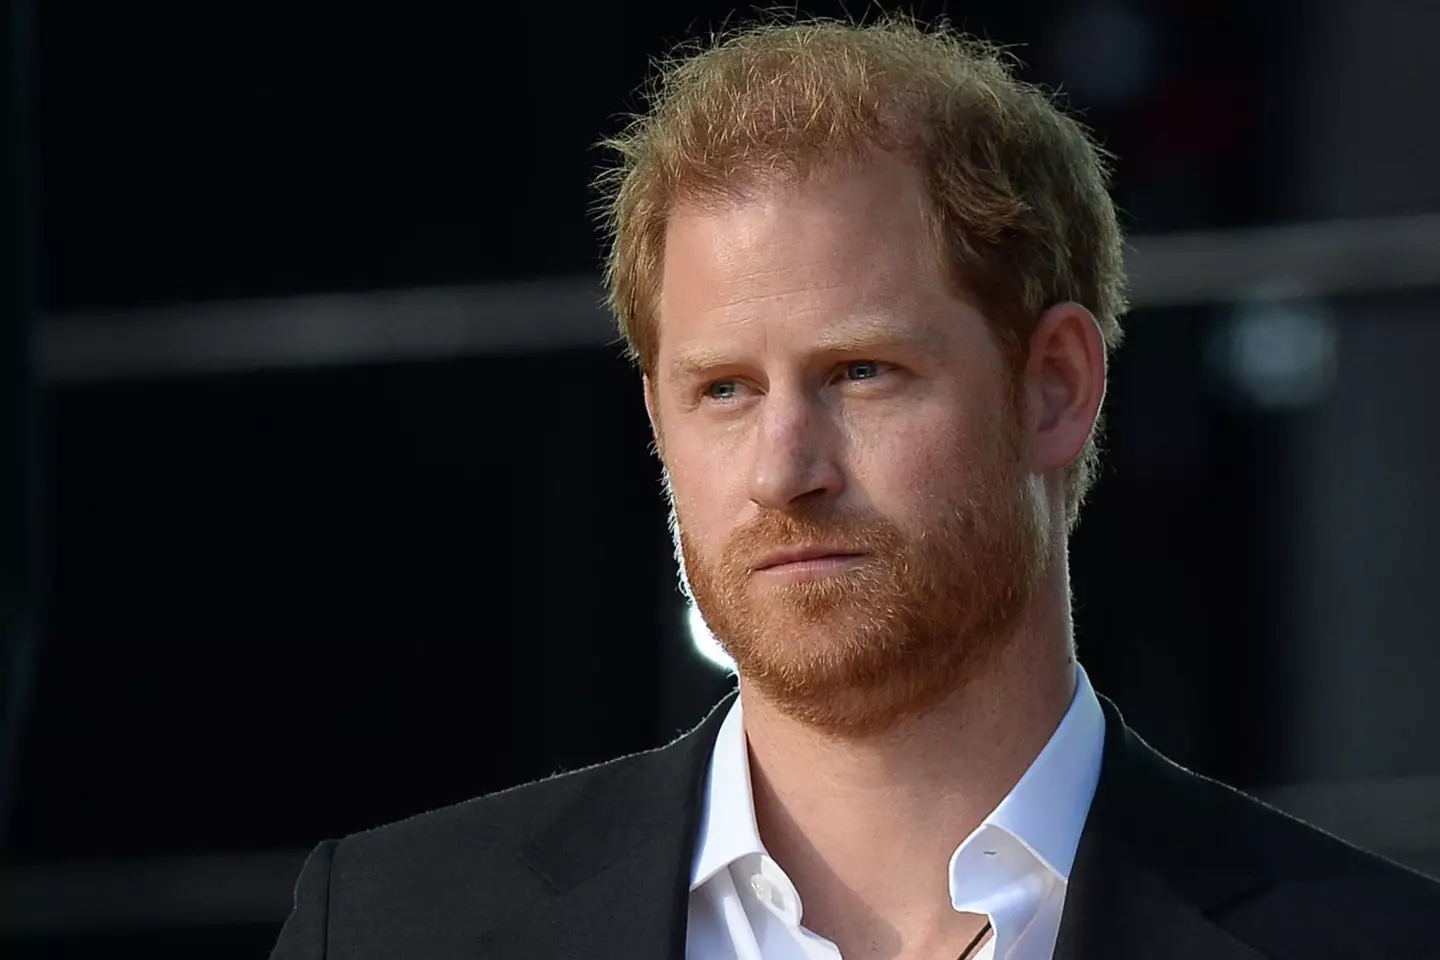 People are loving Prince Harry's new look. (